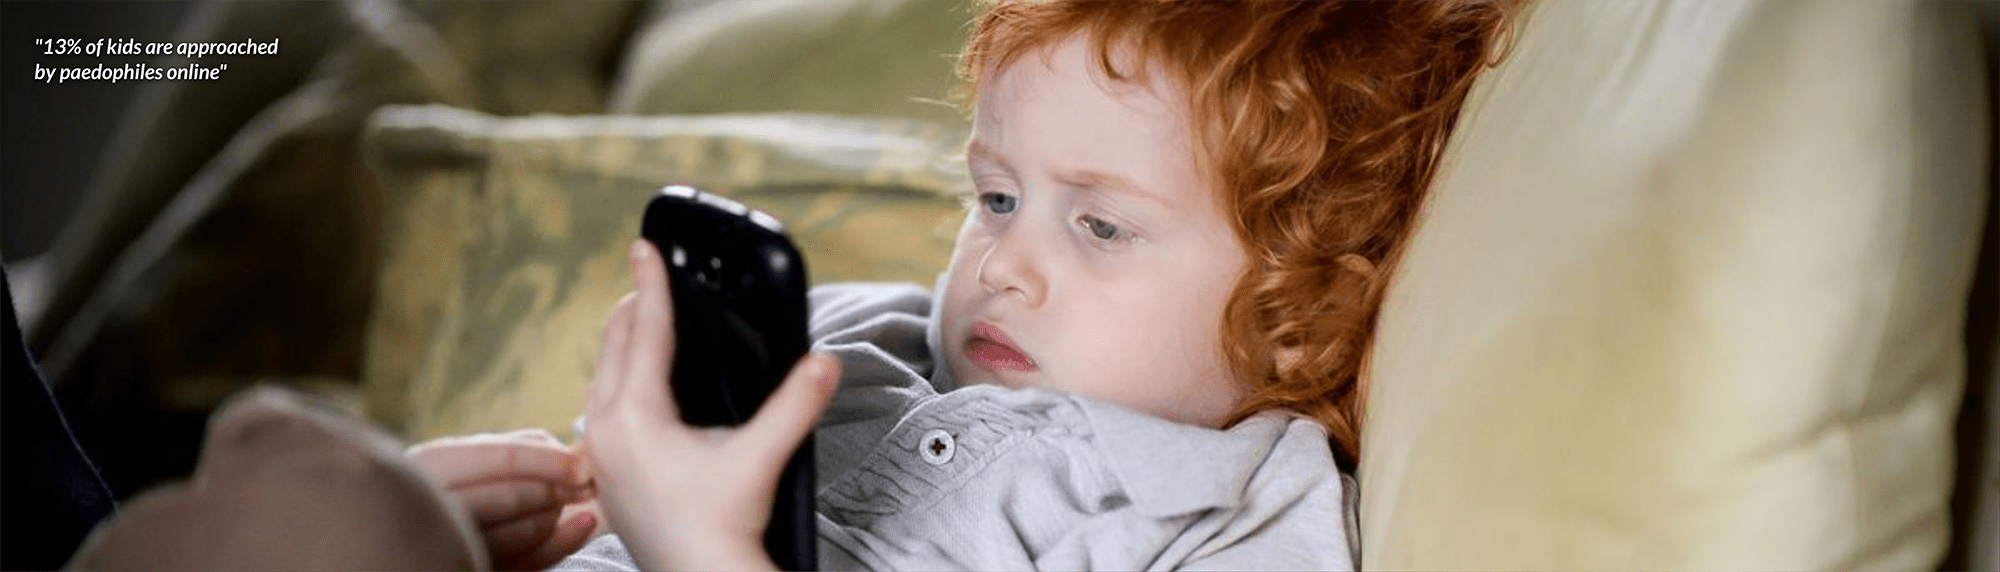 13% of kids are approached by paedophiles online